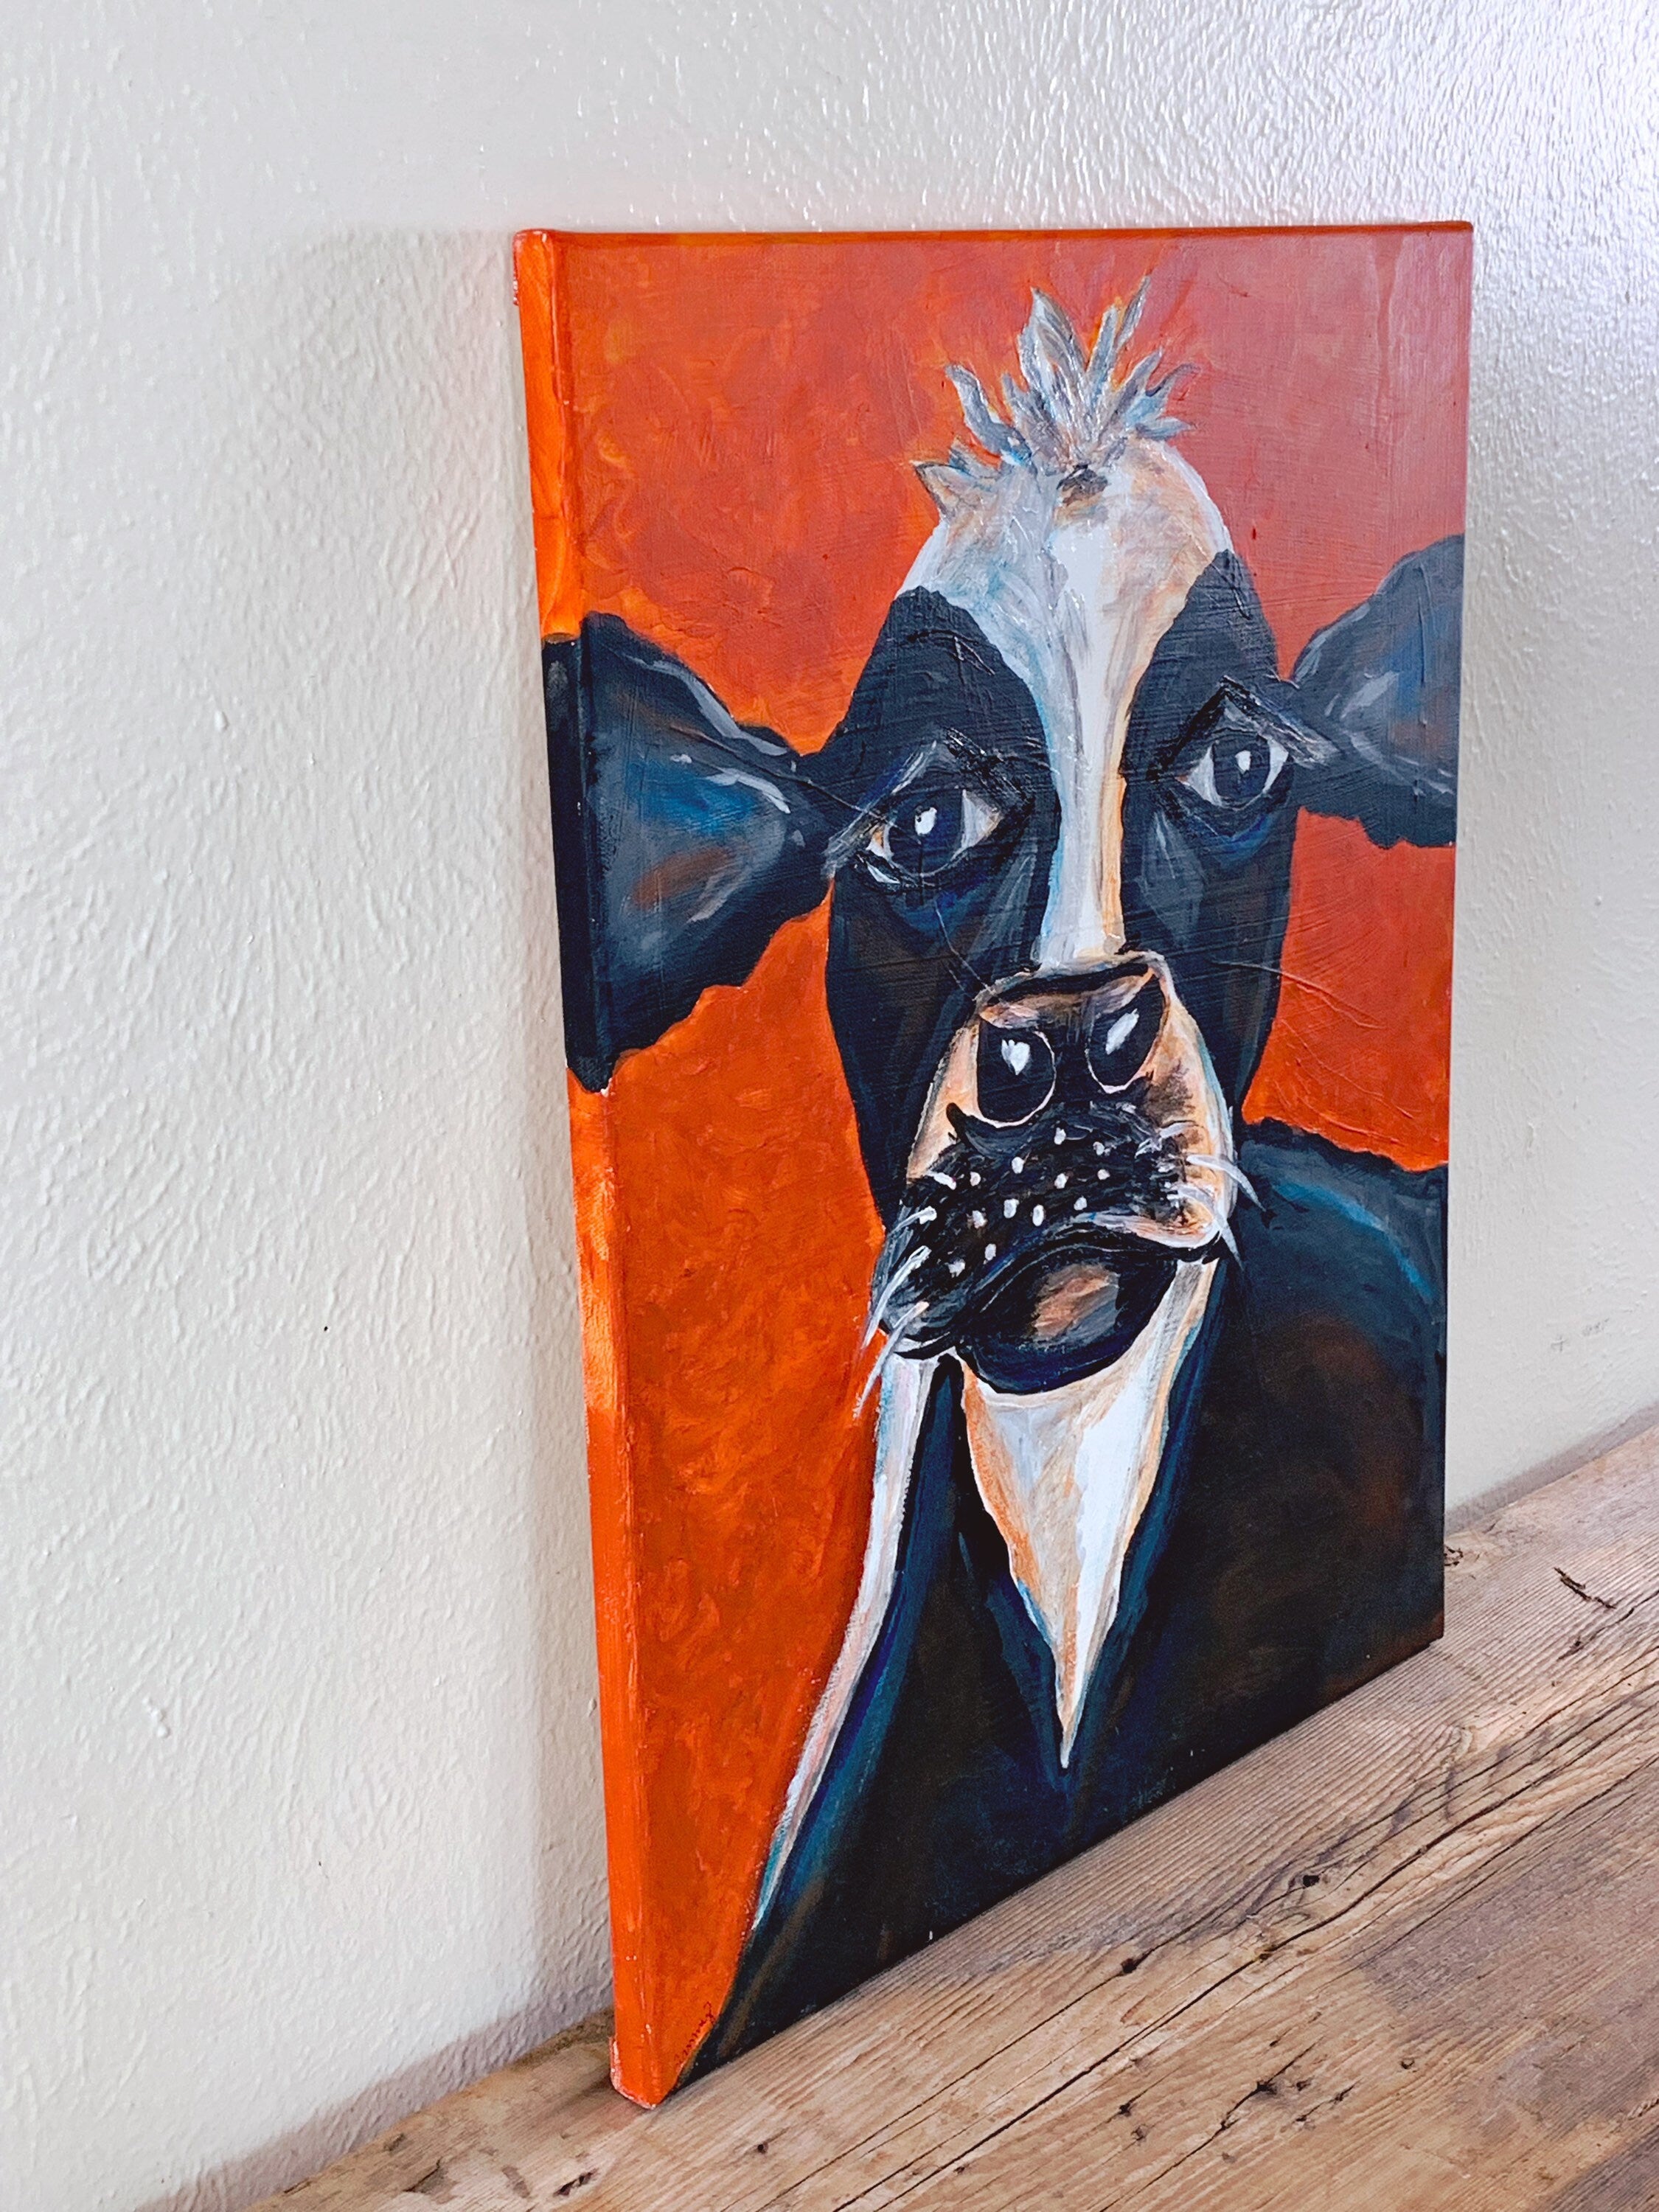 Original Oil Painting of a Cow on Canvas Signed by Artist | Farmhouse Decor | Country Home Wall Art | Boys Room Decor